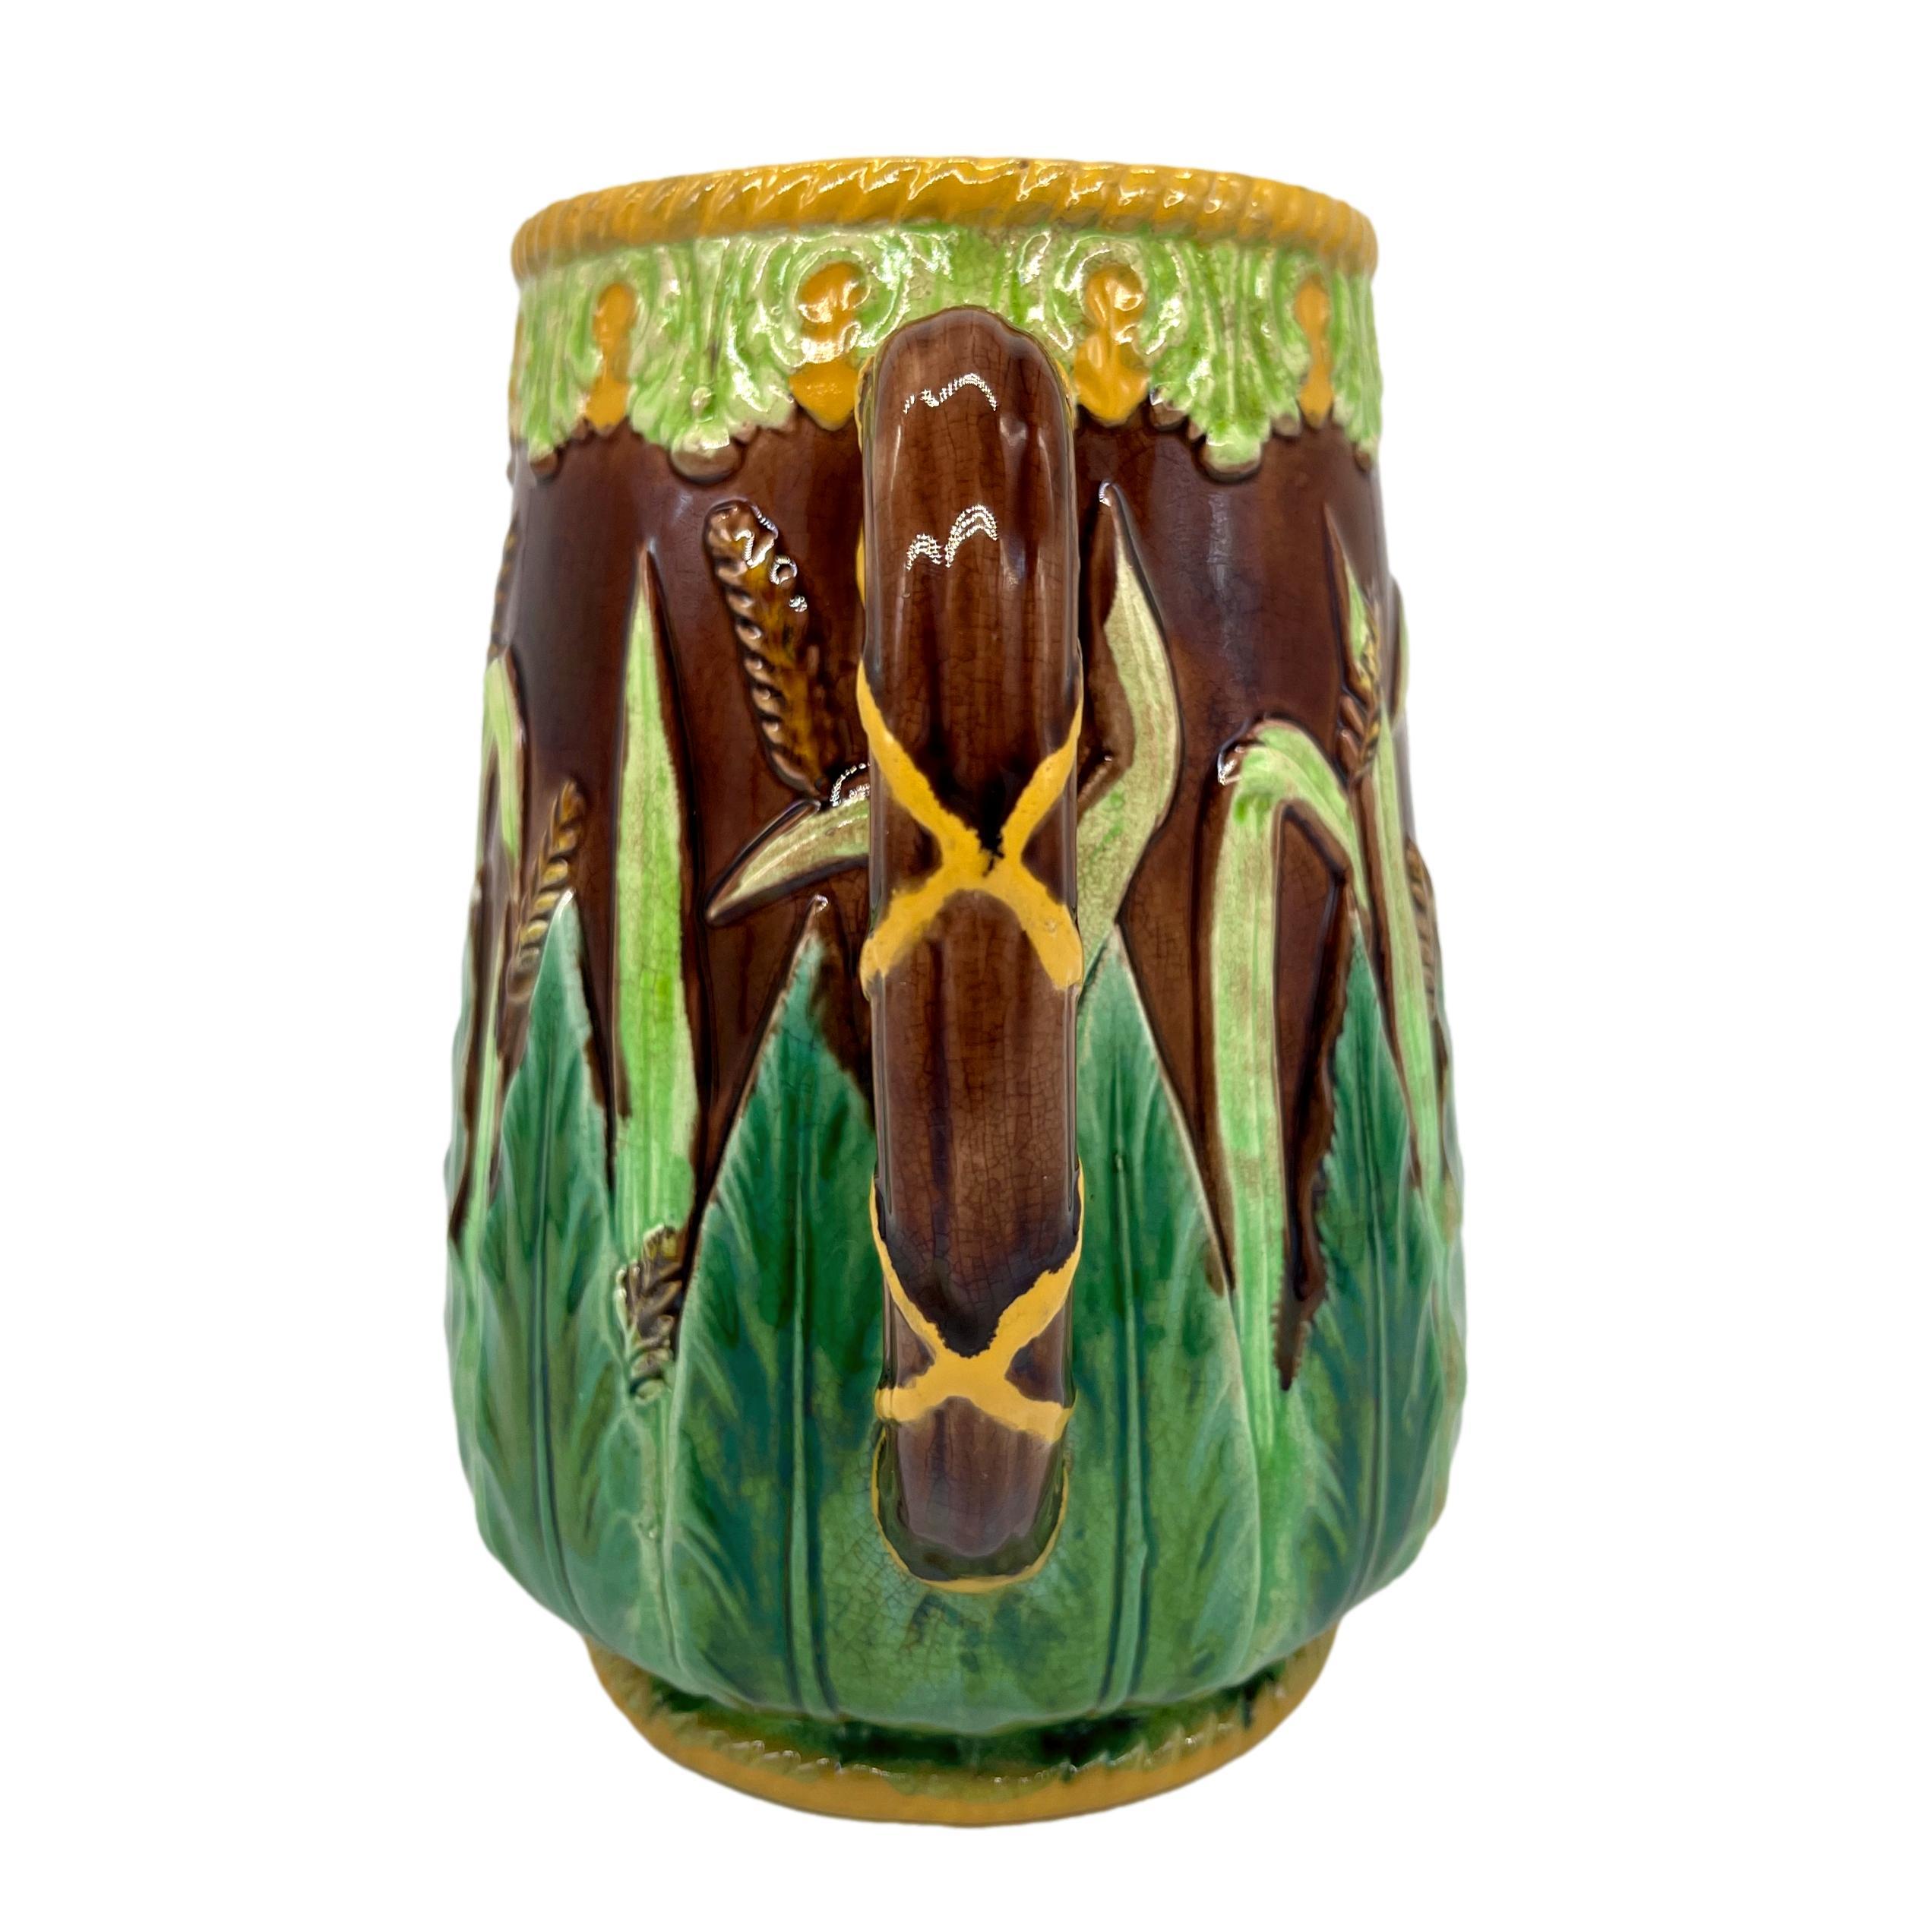 George Jones Majolica Wheat Pitcher with Green Acanthus Leaves, Ca. 1875 For Sale 1